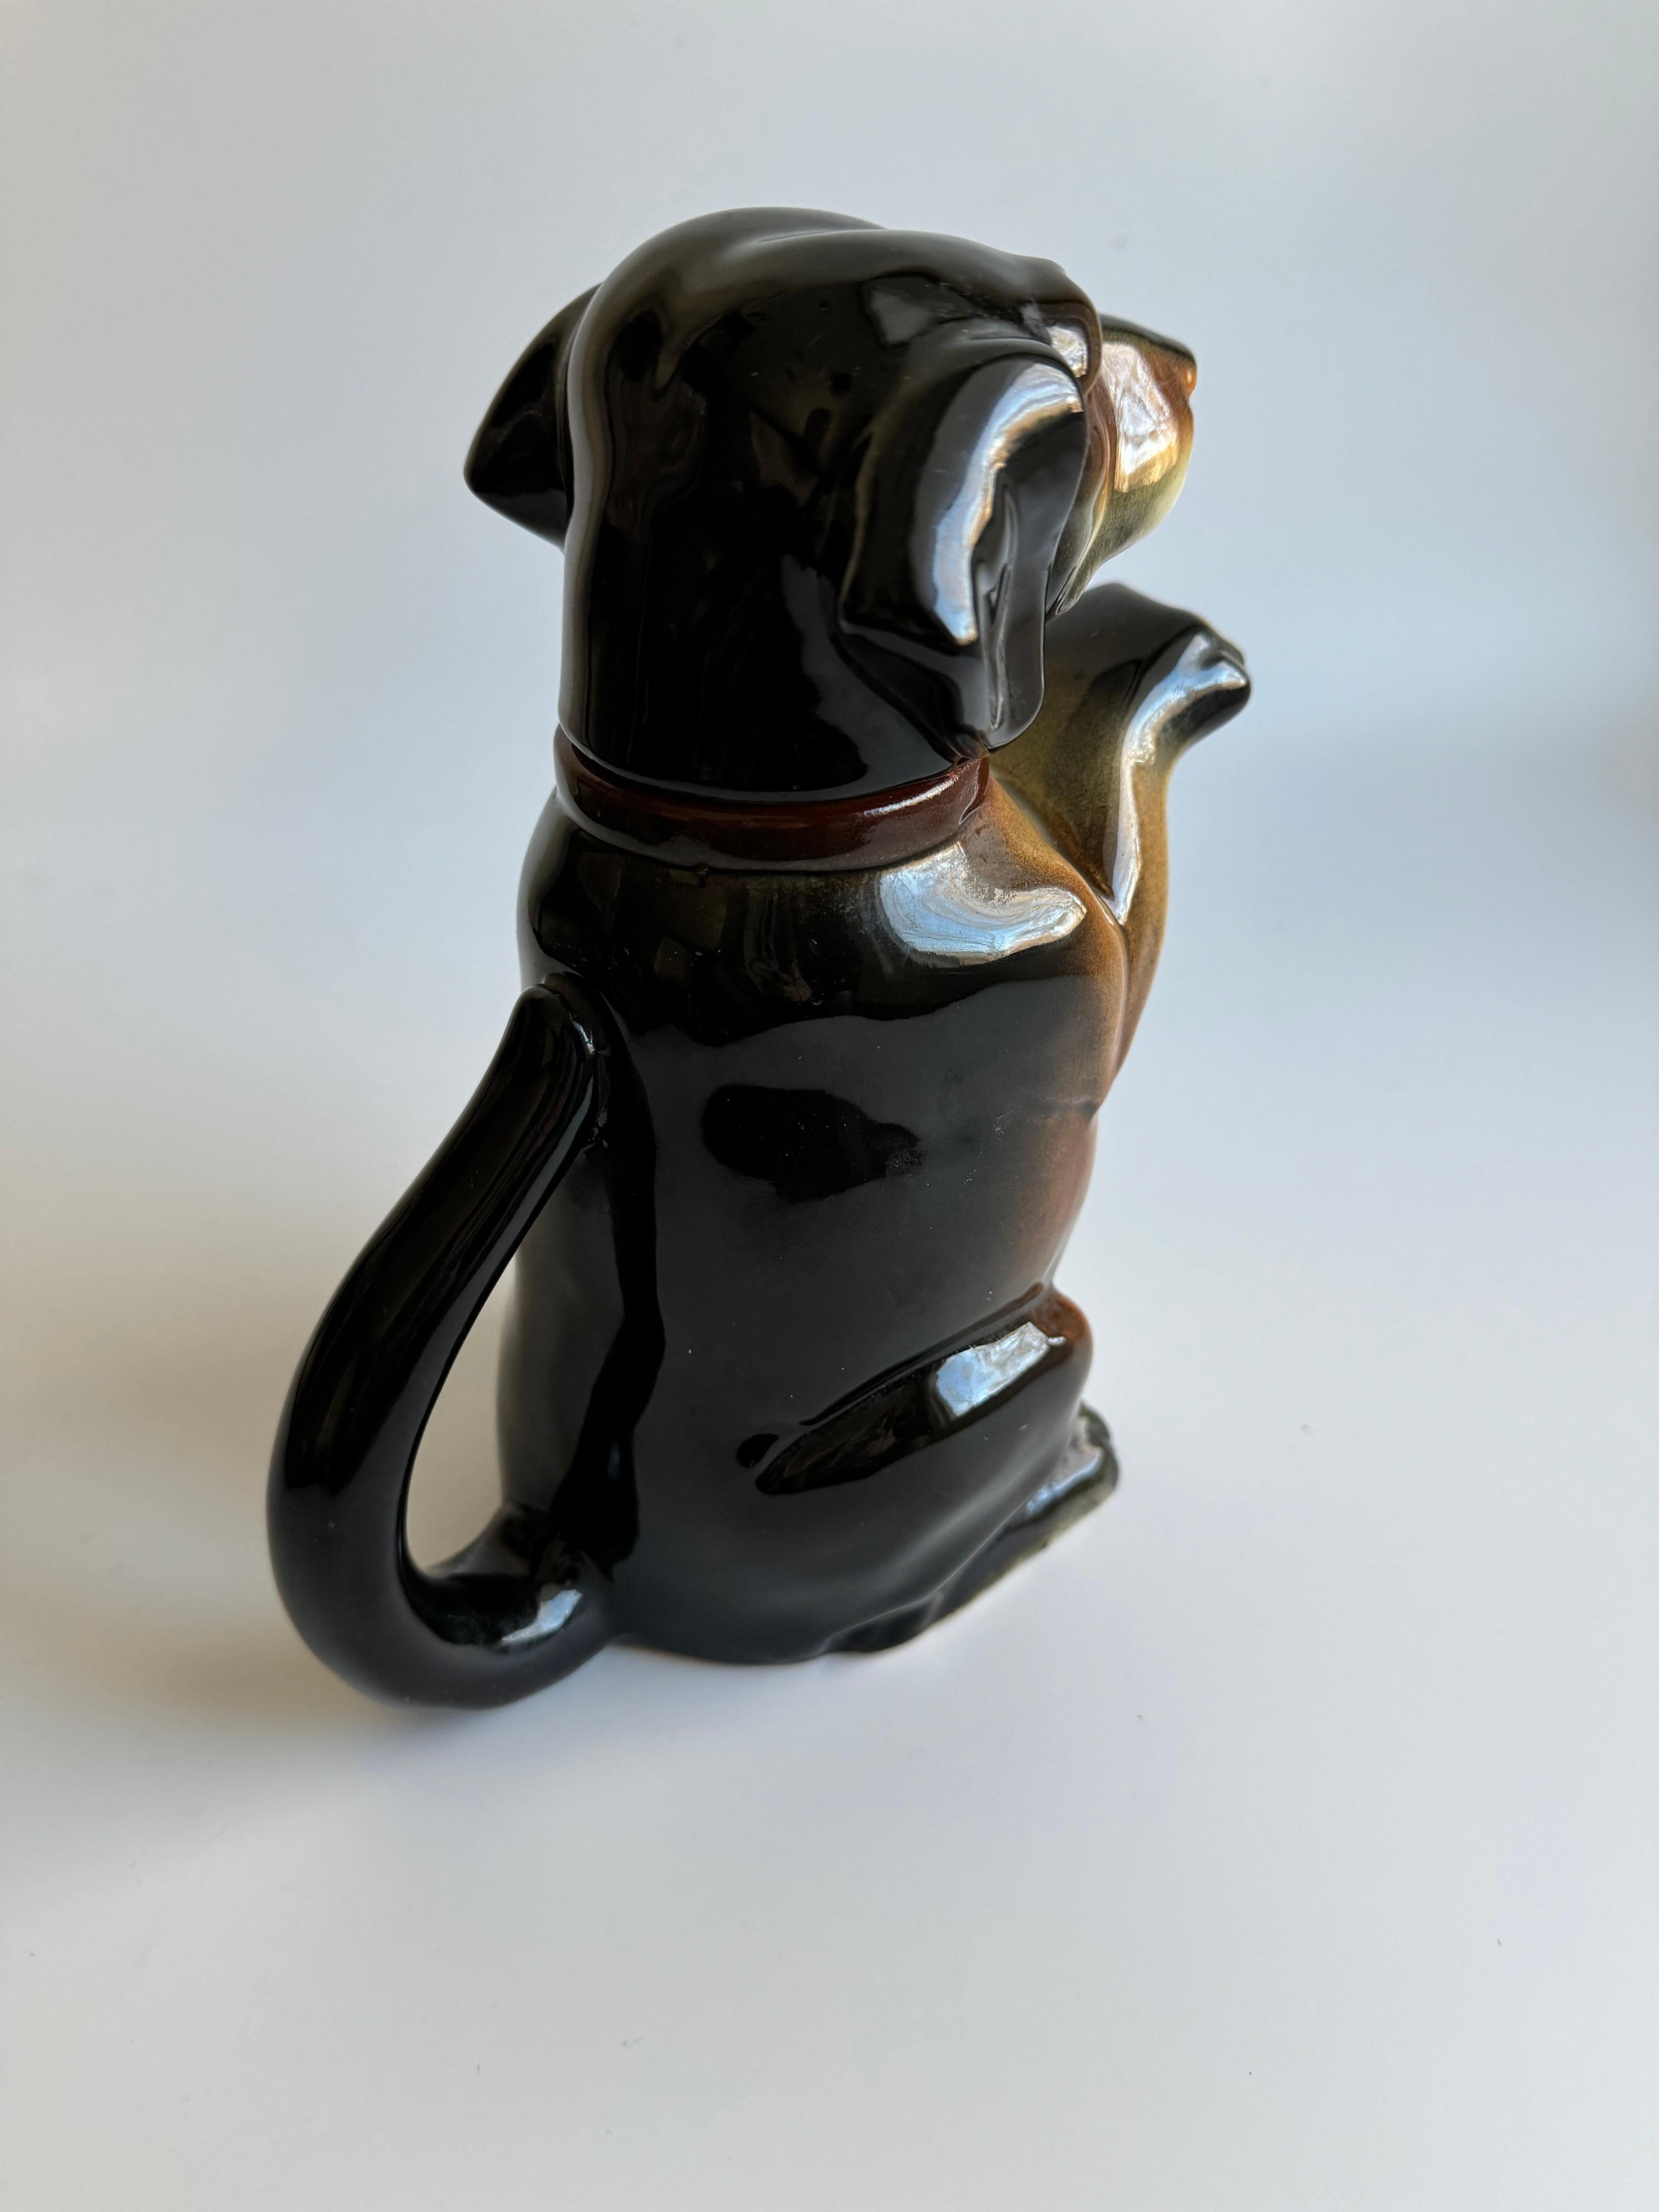 Hand-Crafted Majolica “Erphila” Dachshund Dog Teapot c.1920-1940 Made in Germany For Sale